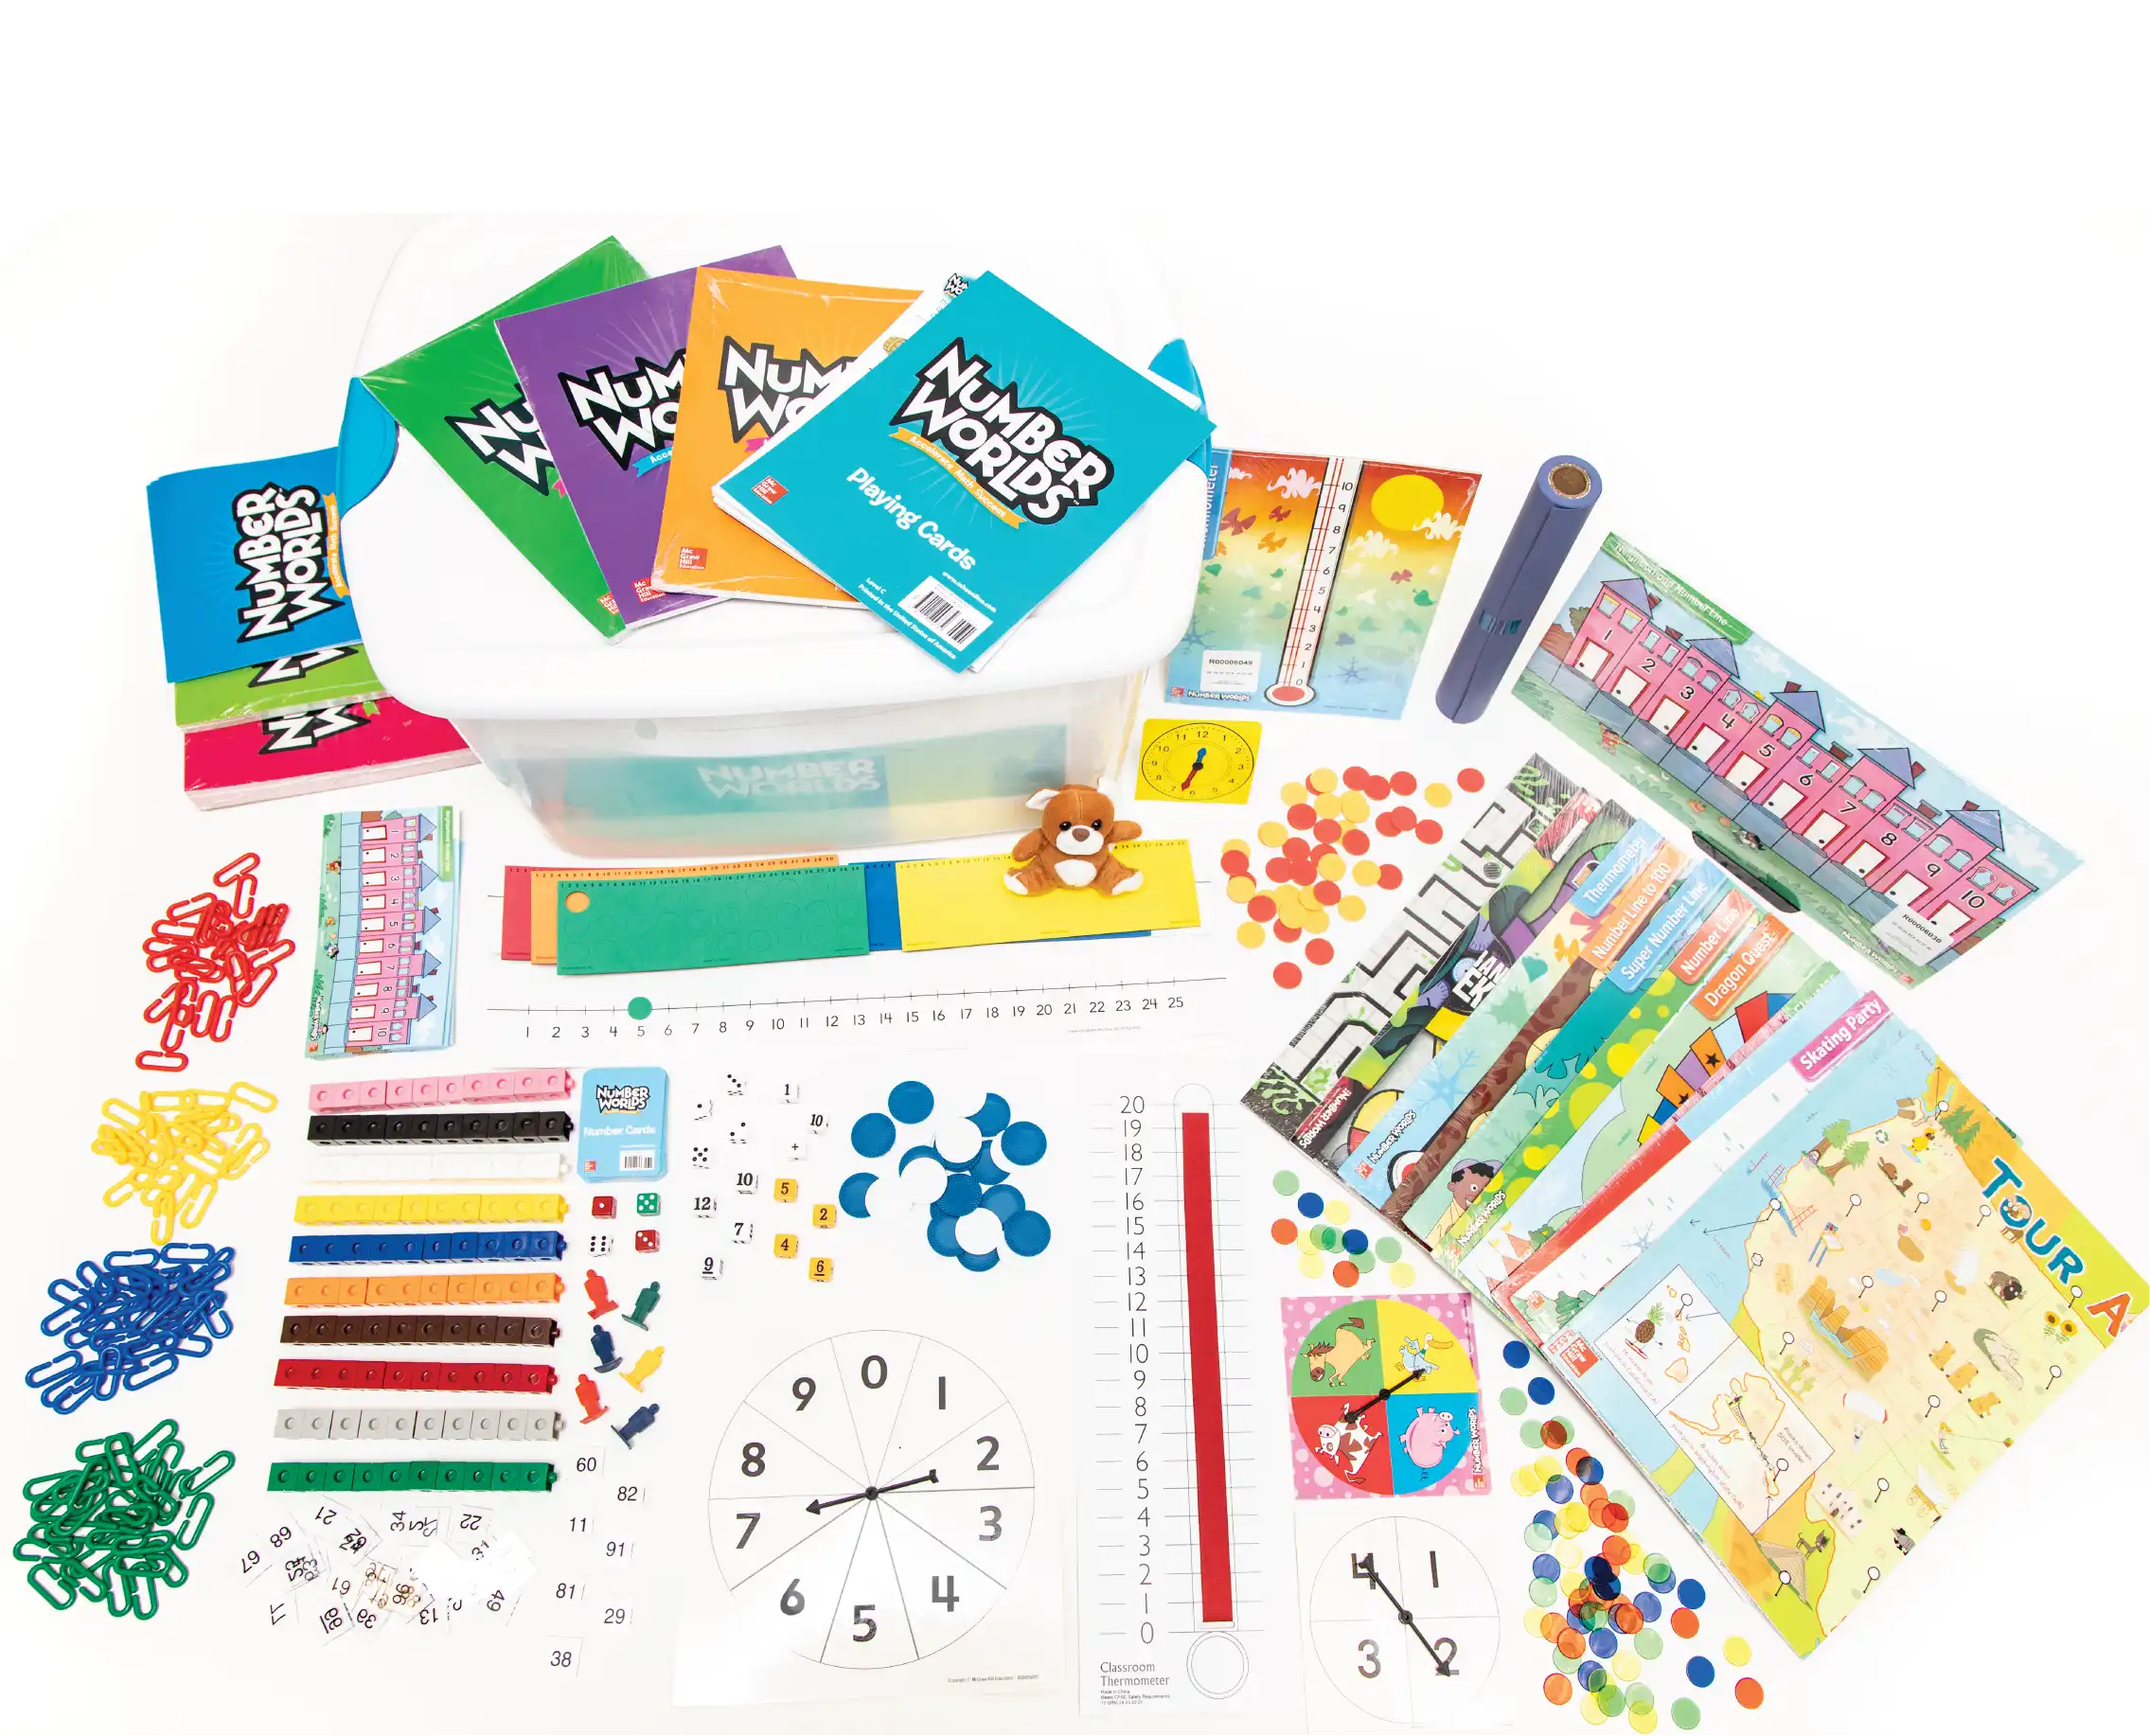 Number Worlds manipulative kit contents